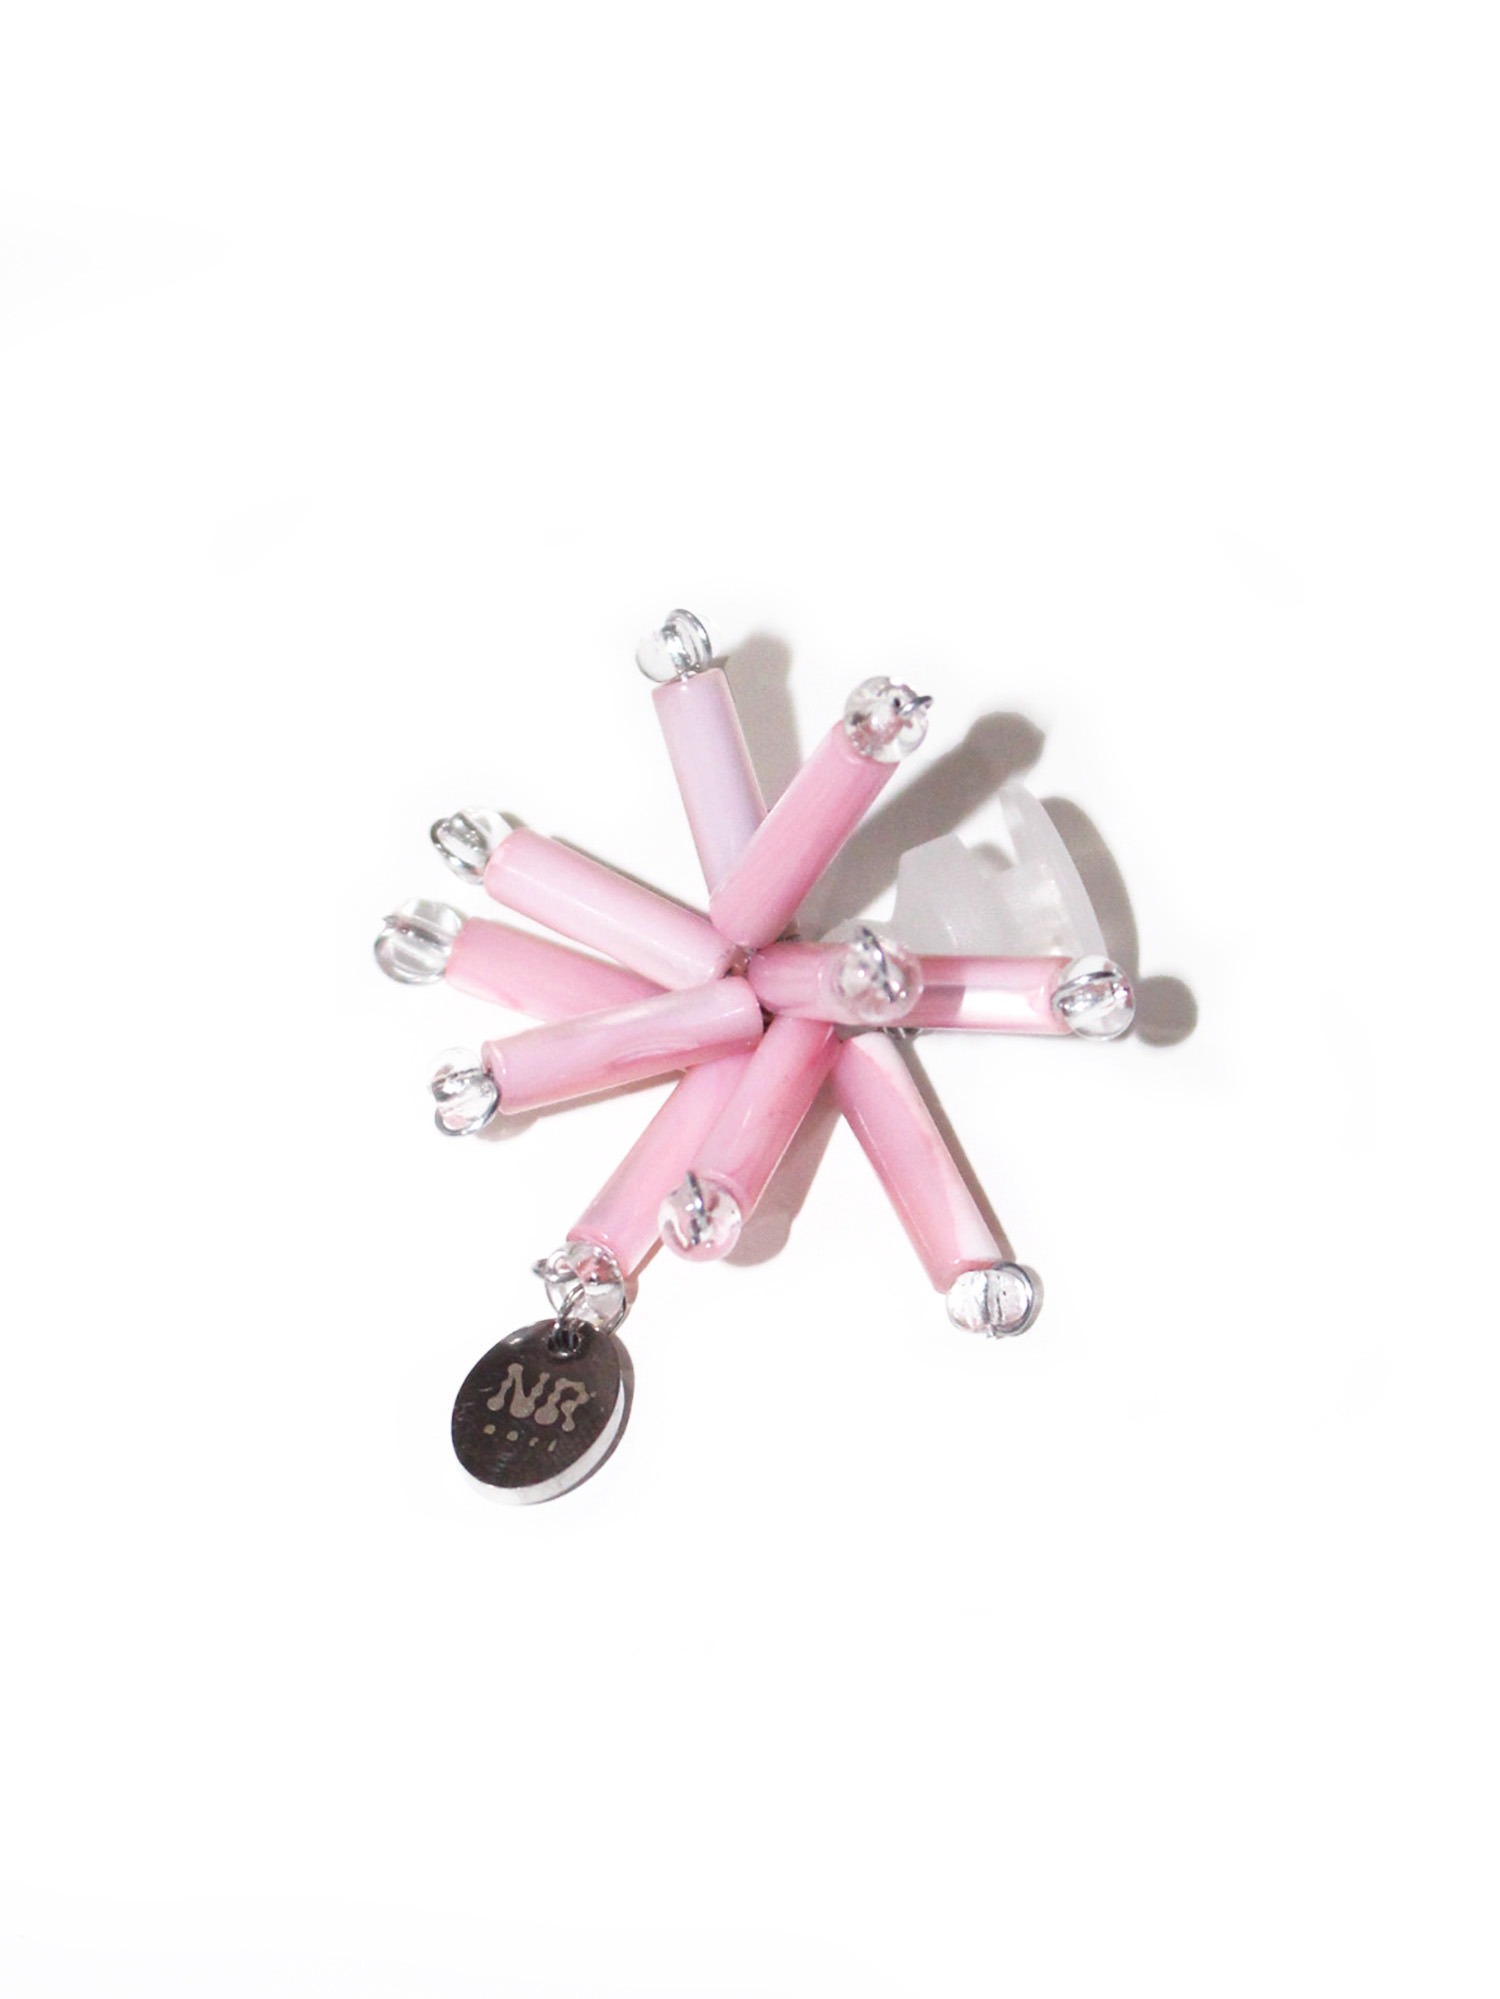 [COUTURE] Affectif crystallus charm _ pink